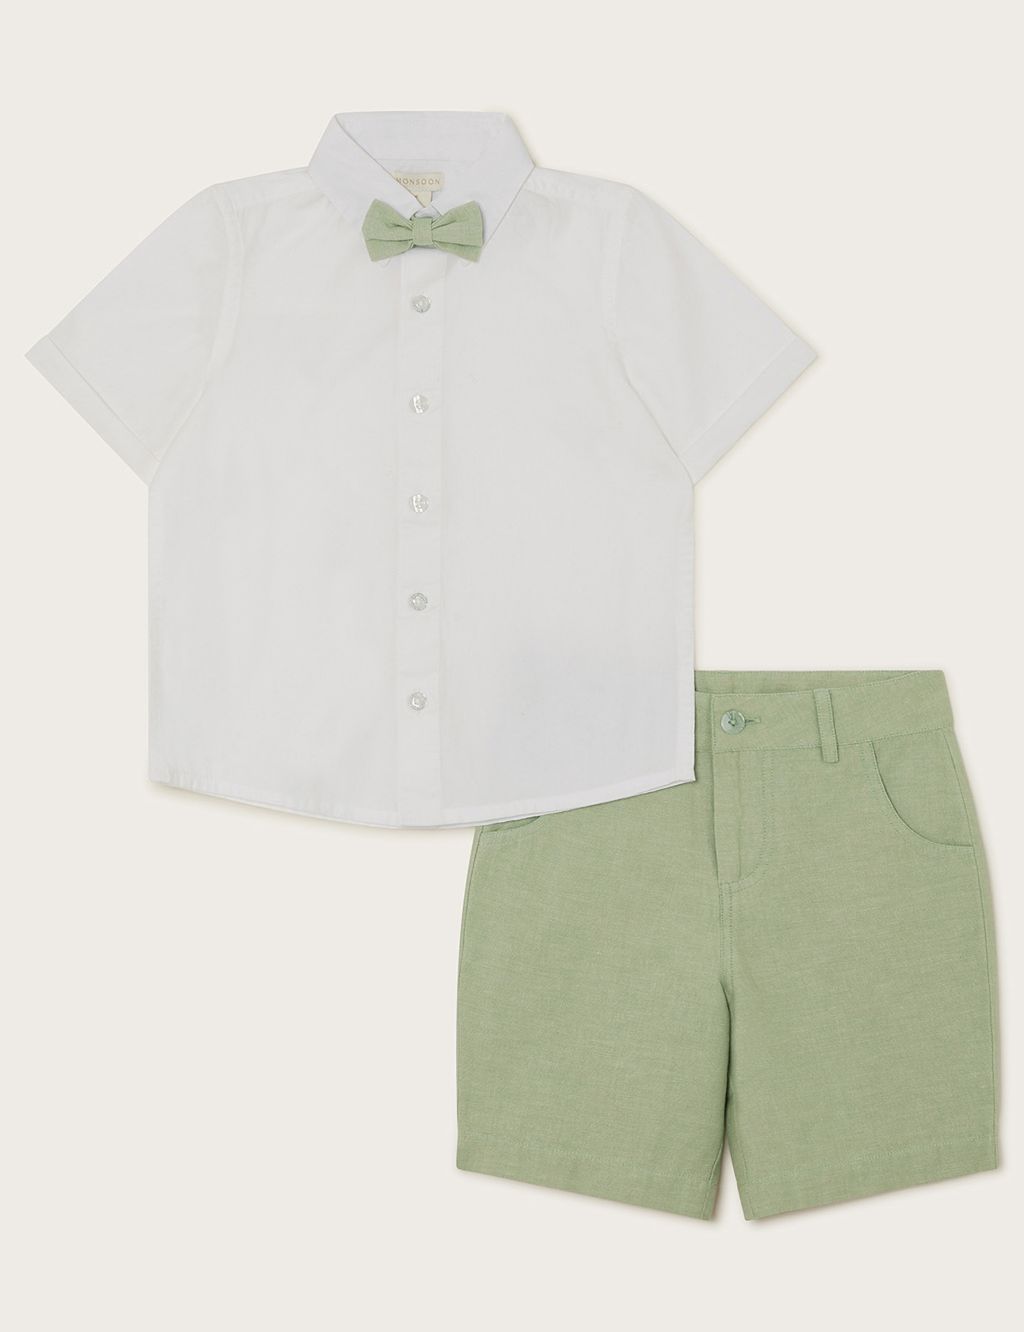 3pc Pure Cotton Top & Bottom Outfit